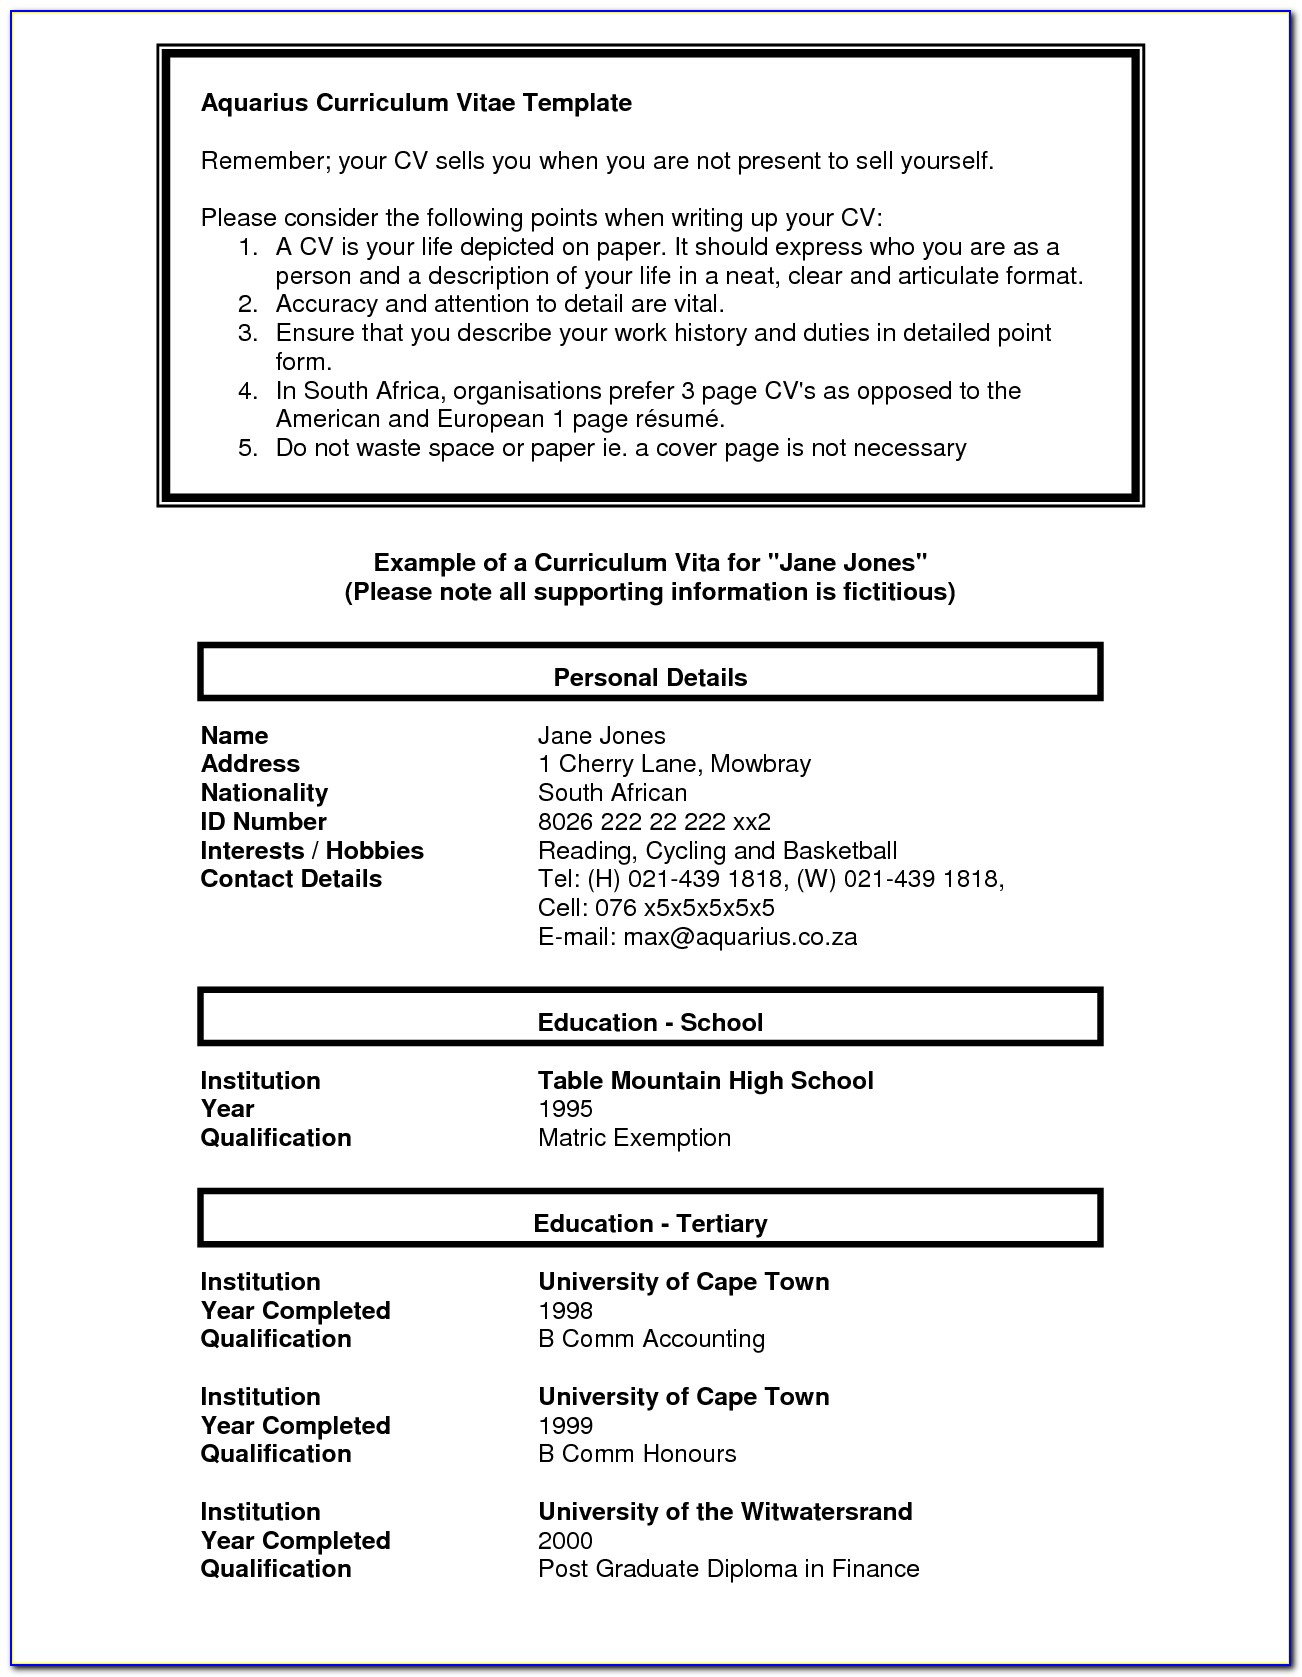 cv-template-for-student-south-africa-qwlearn-riset